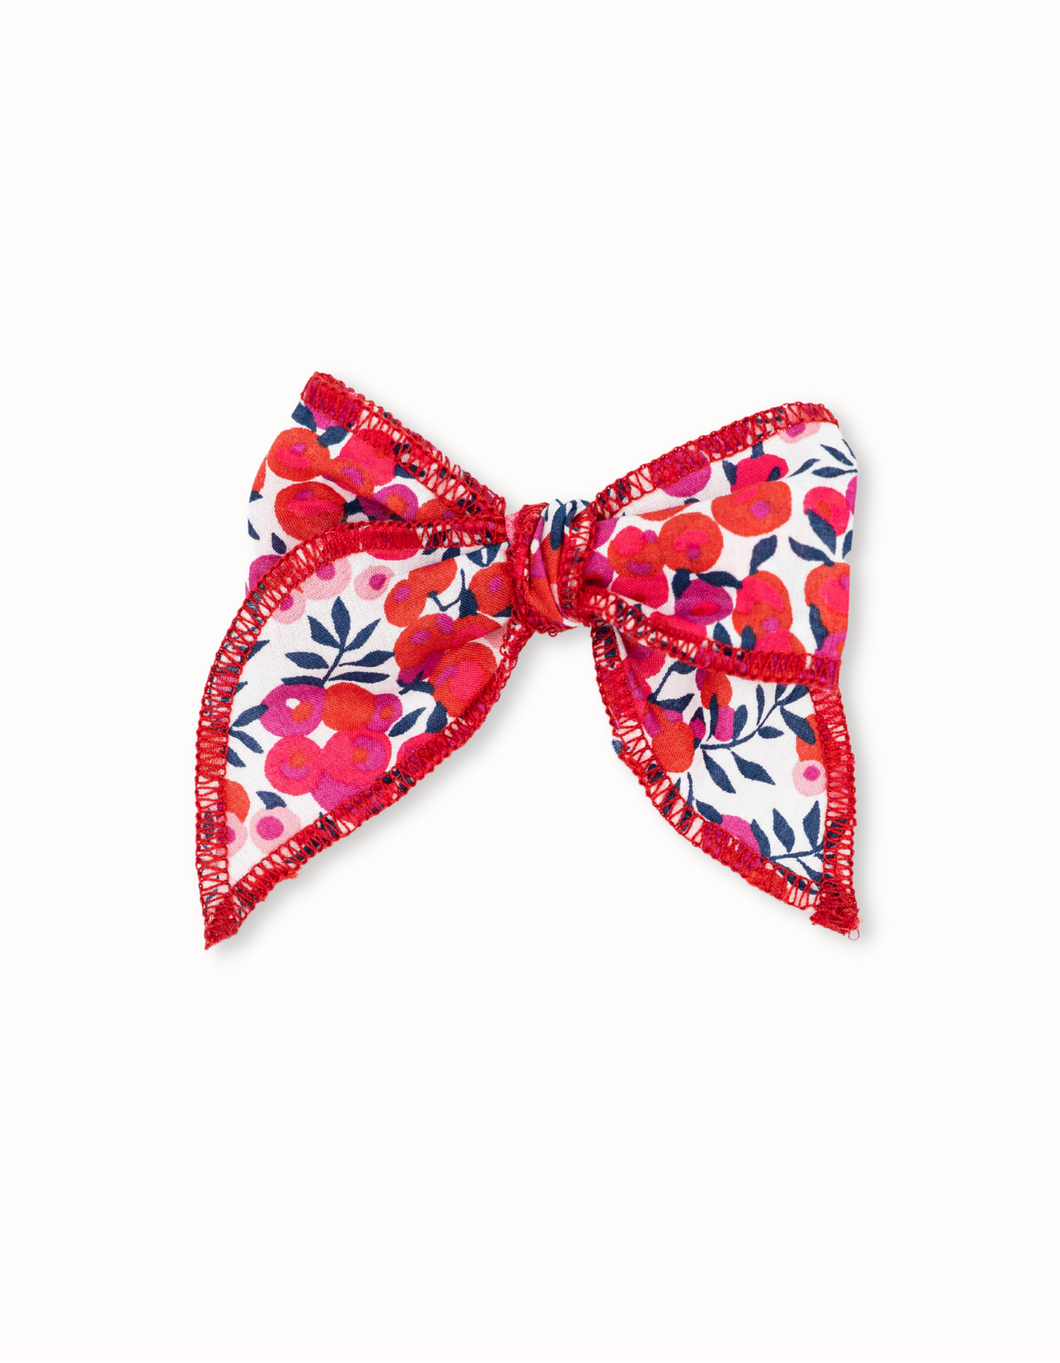 Holly Mini Fable Bow in Liberty of London Fabric